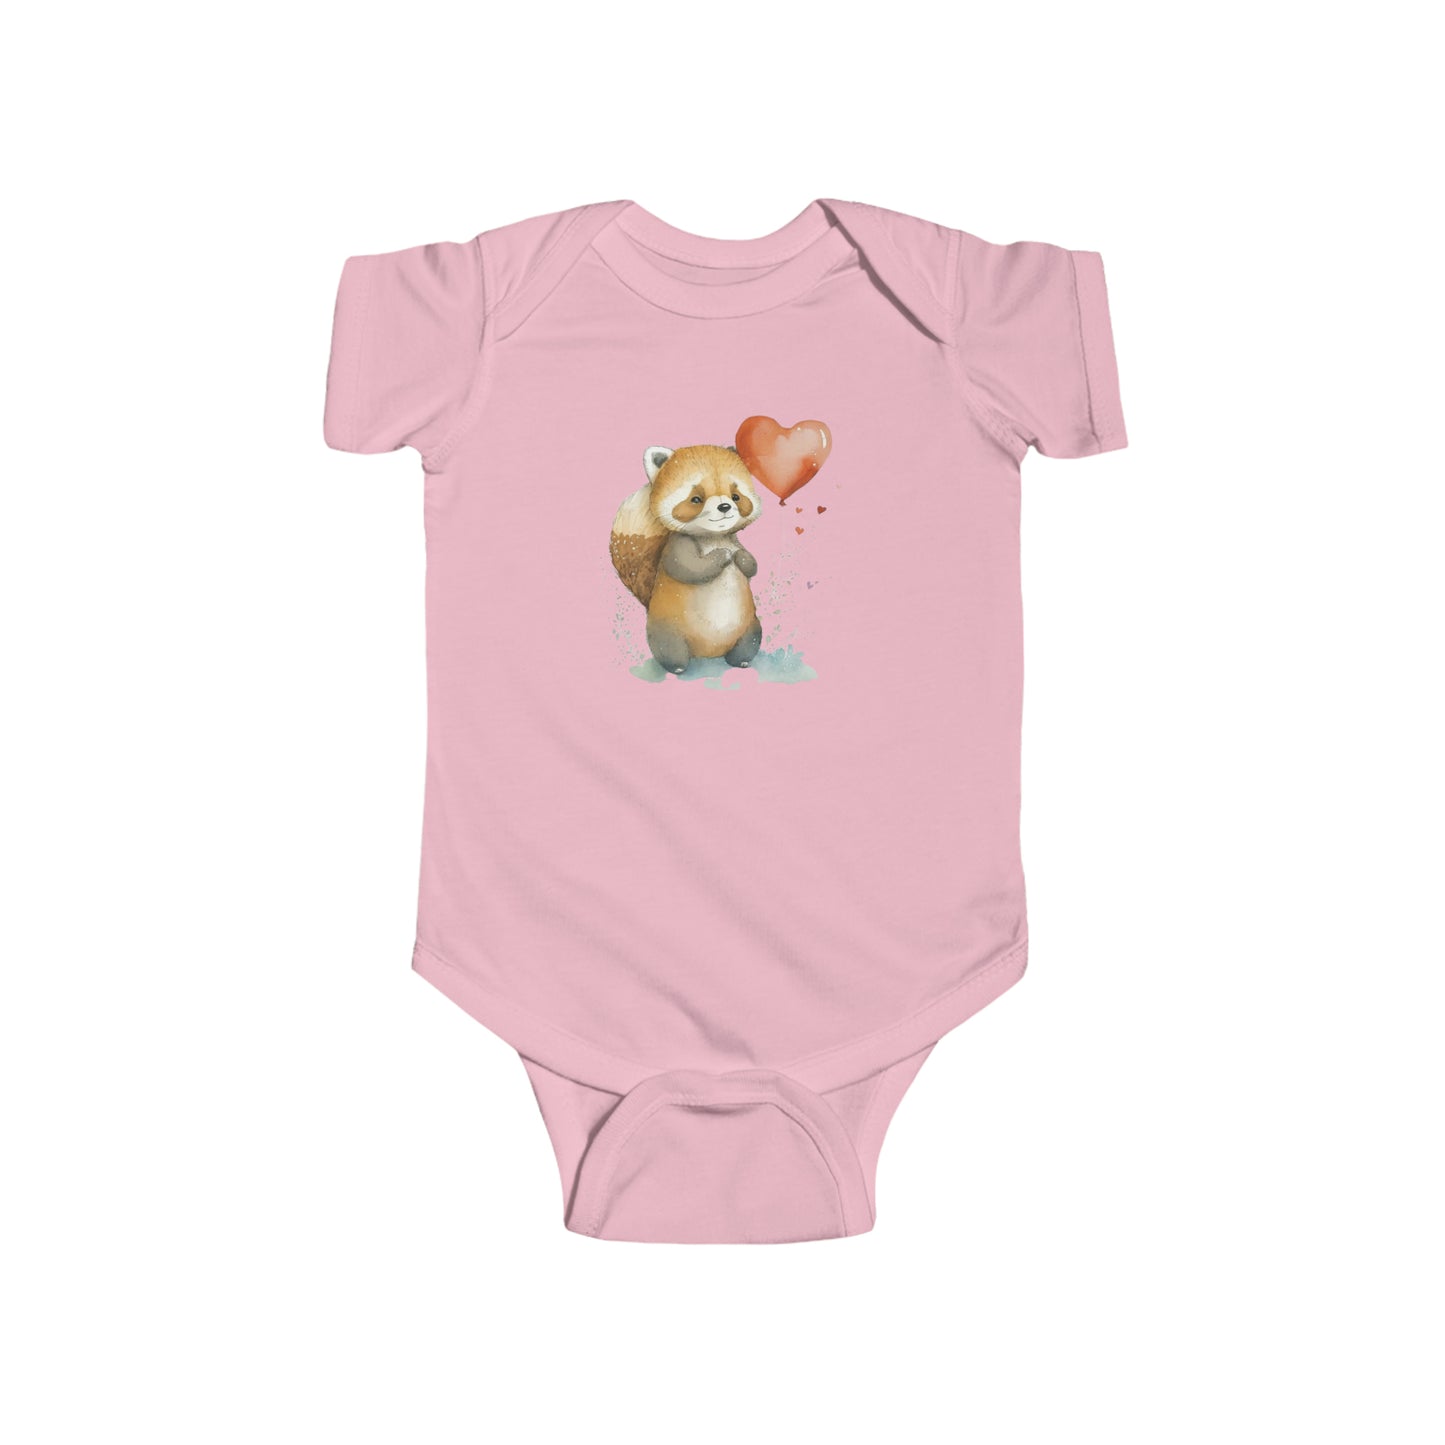 "Cute Animal With Balloon" Infant Jersey - Weave Got Gifts - Unique Gifts You Won’t Find Anywhere Else!